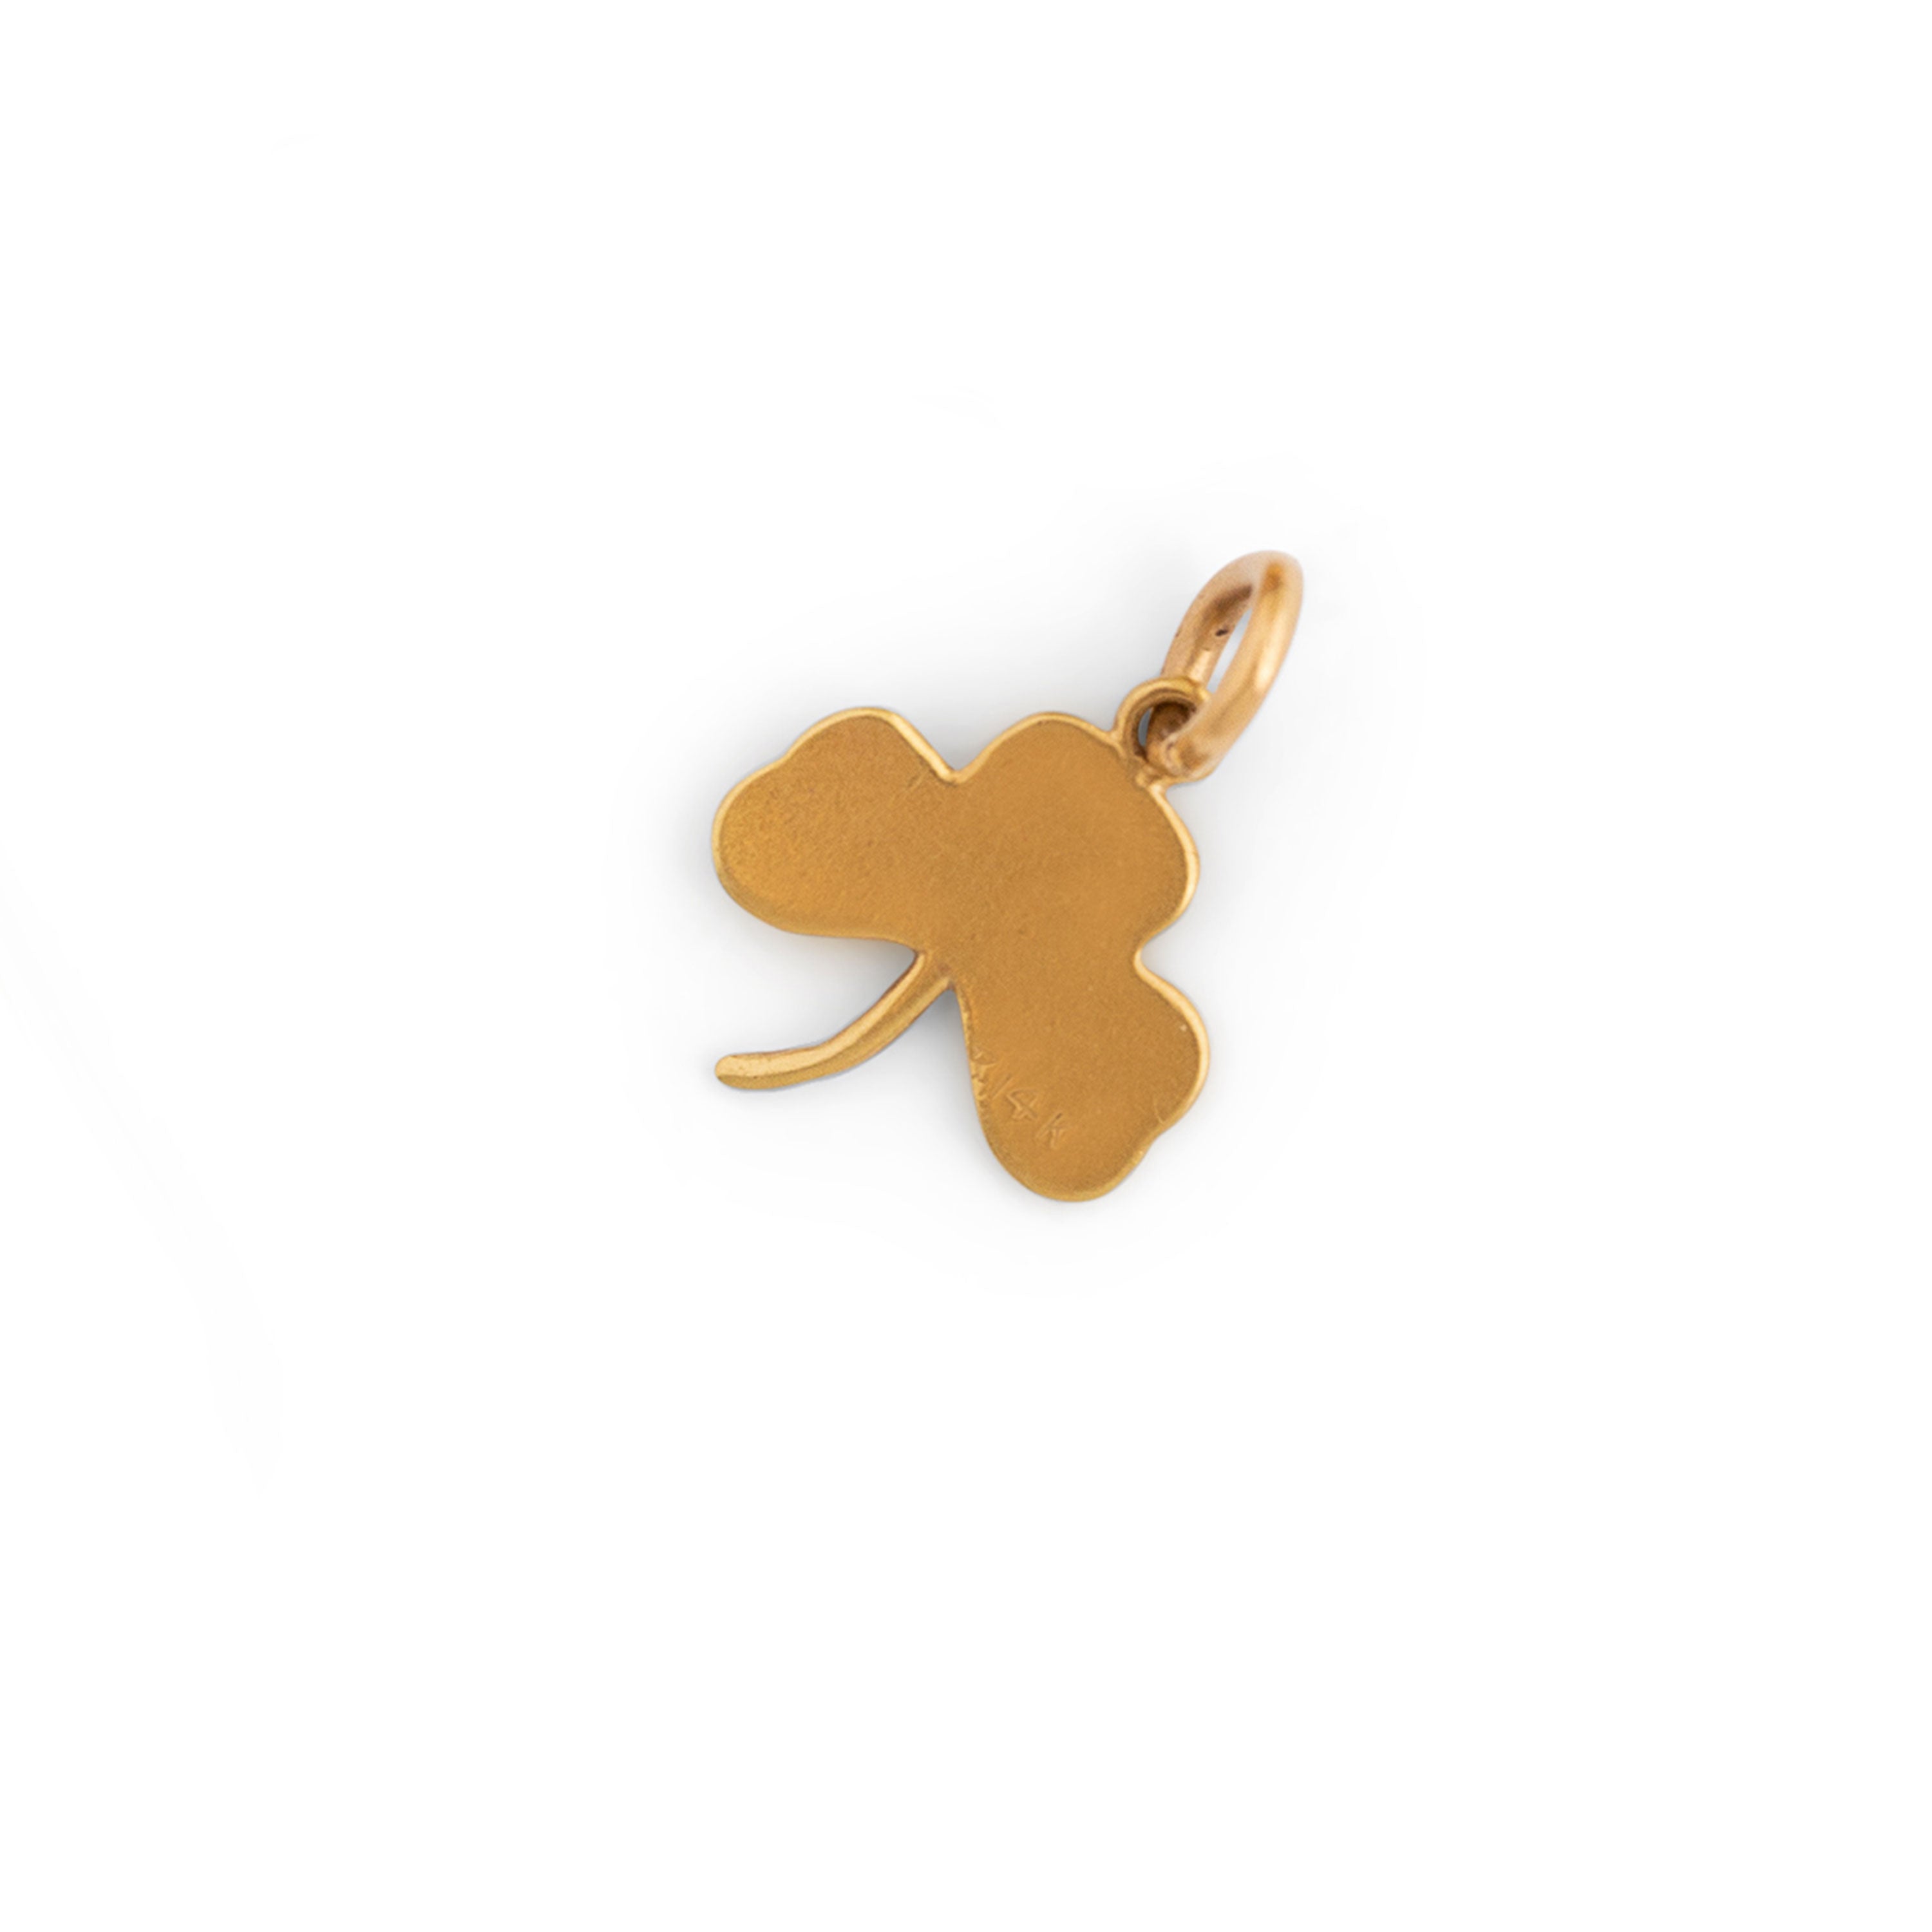 Victorian Enamel Clover and 14k Gold Charm